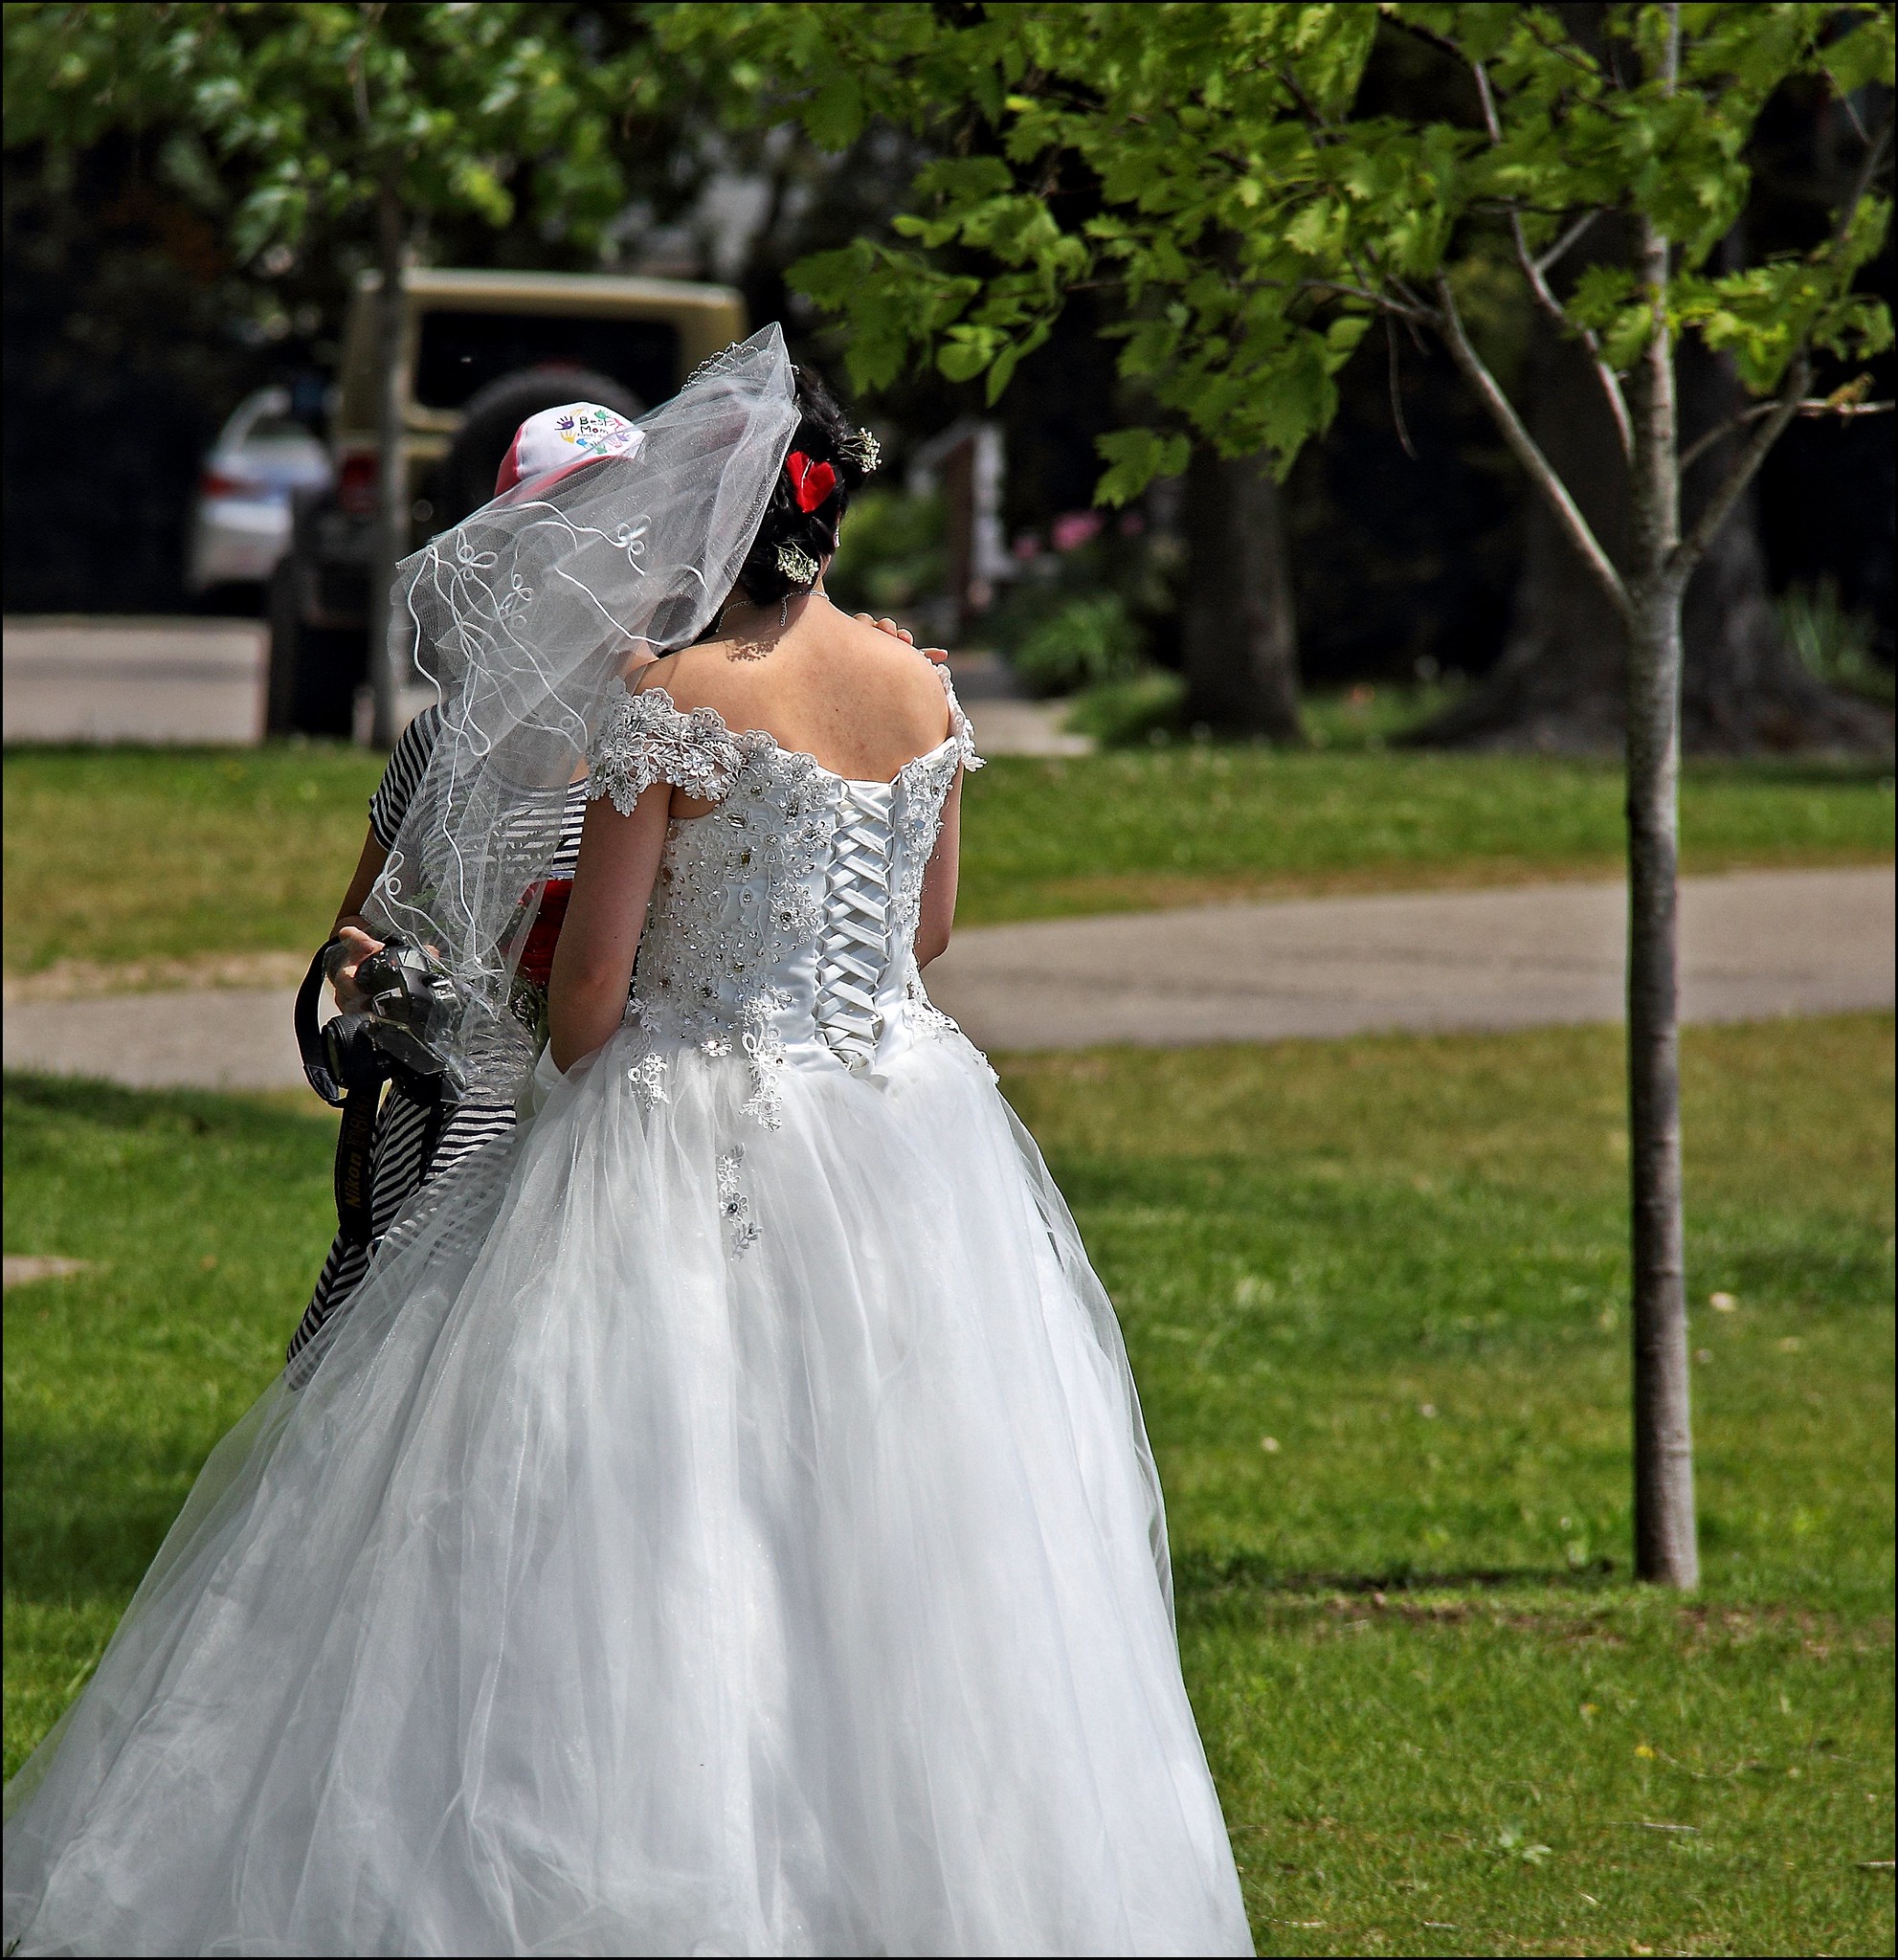 Back-view of a bride standing outdoors | Source: Flickr